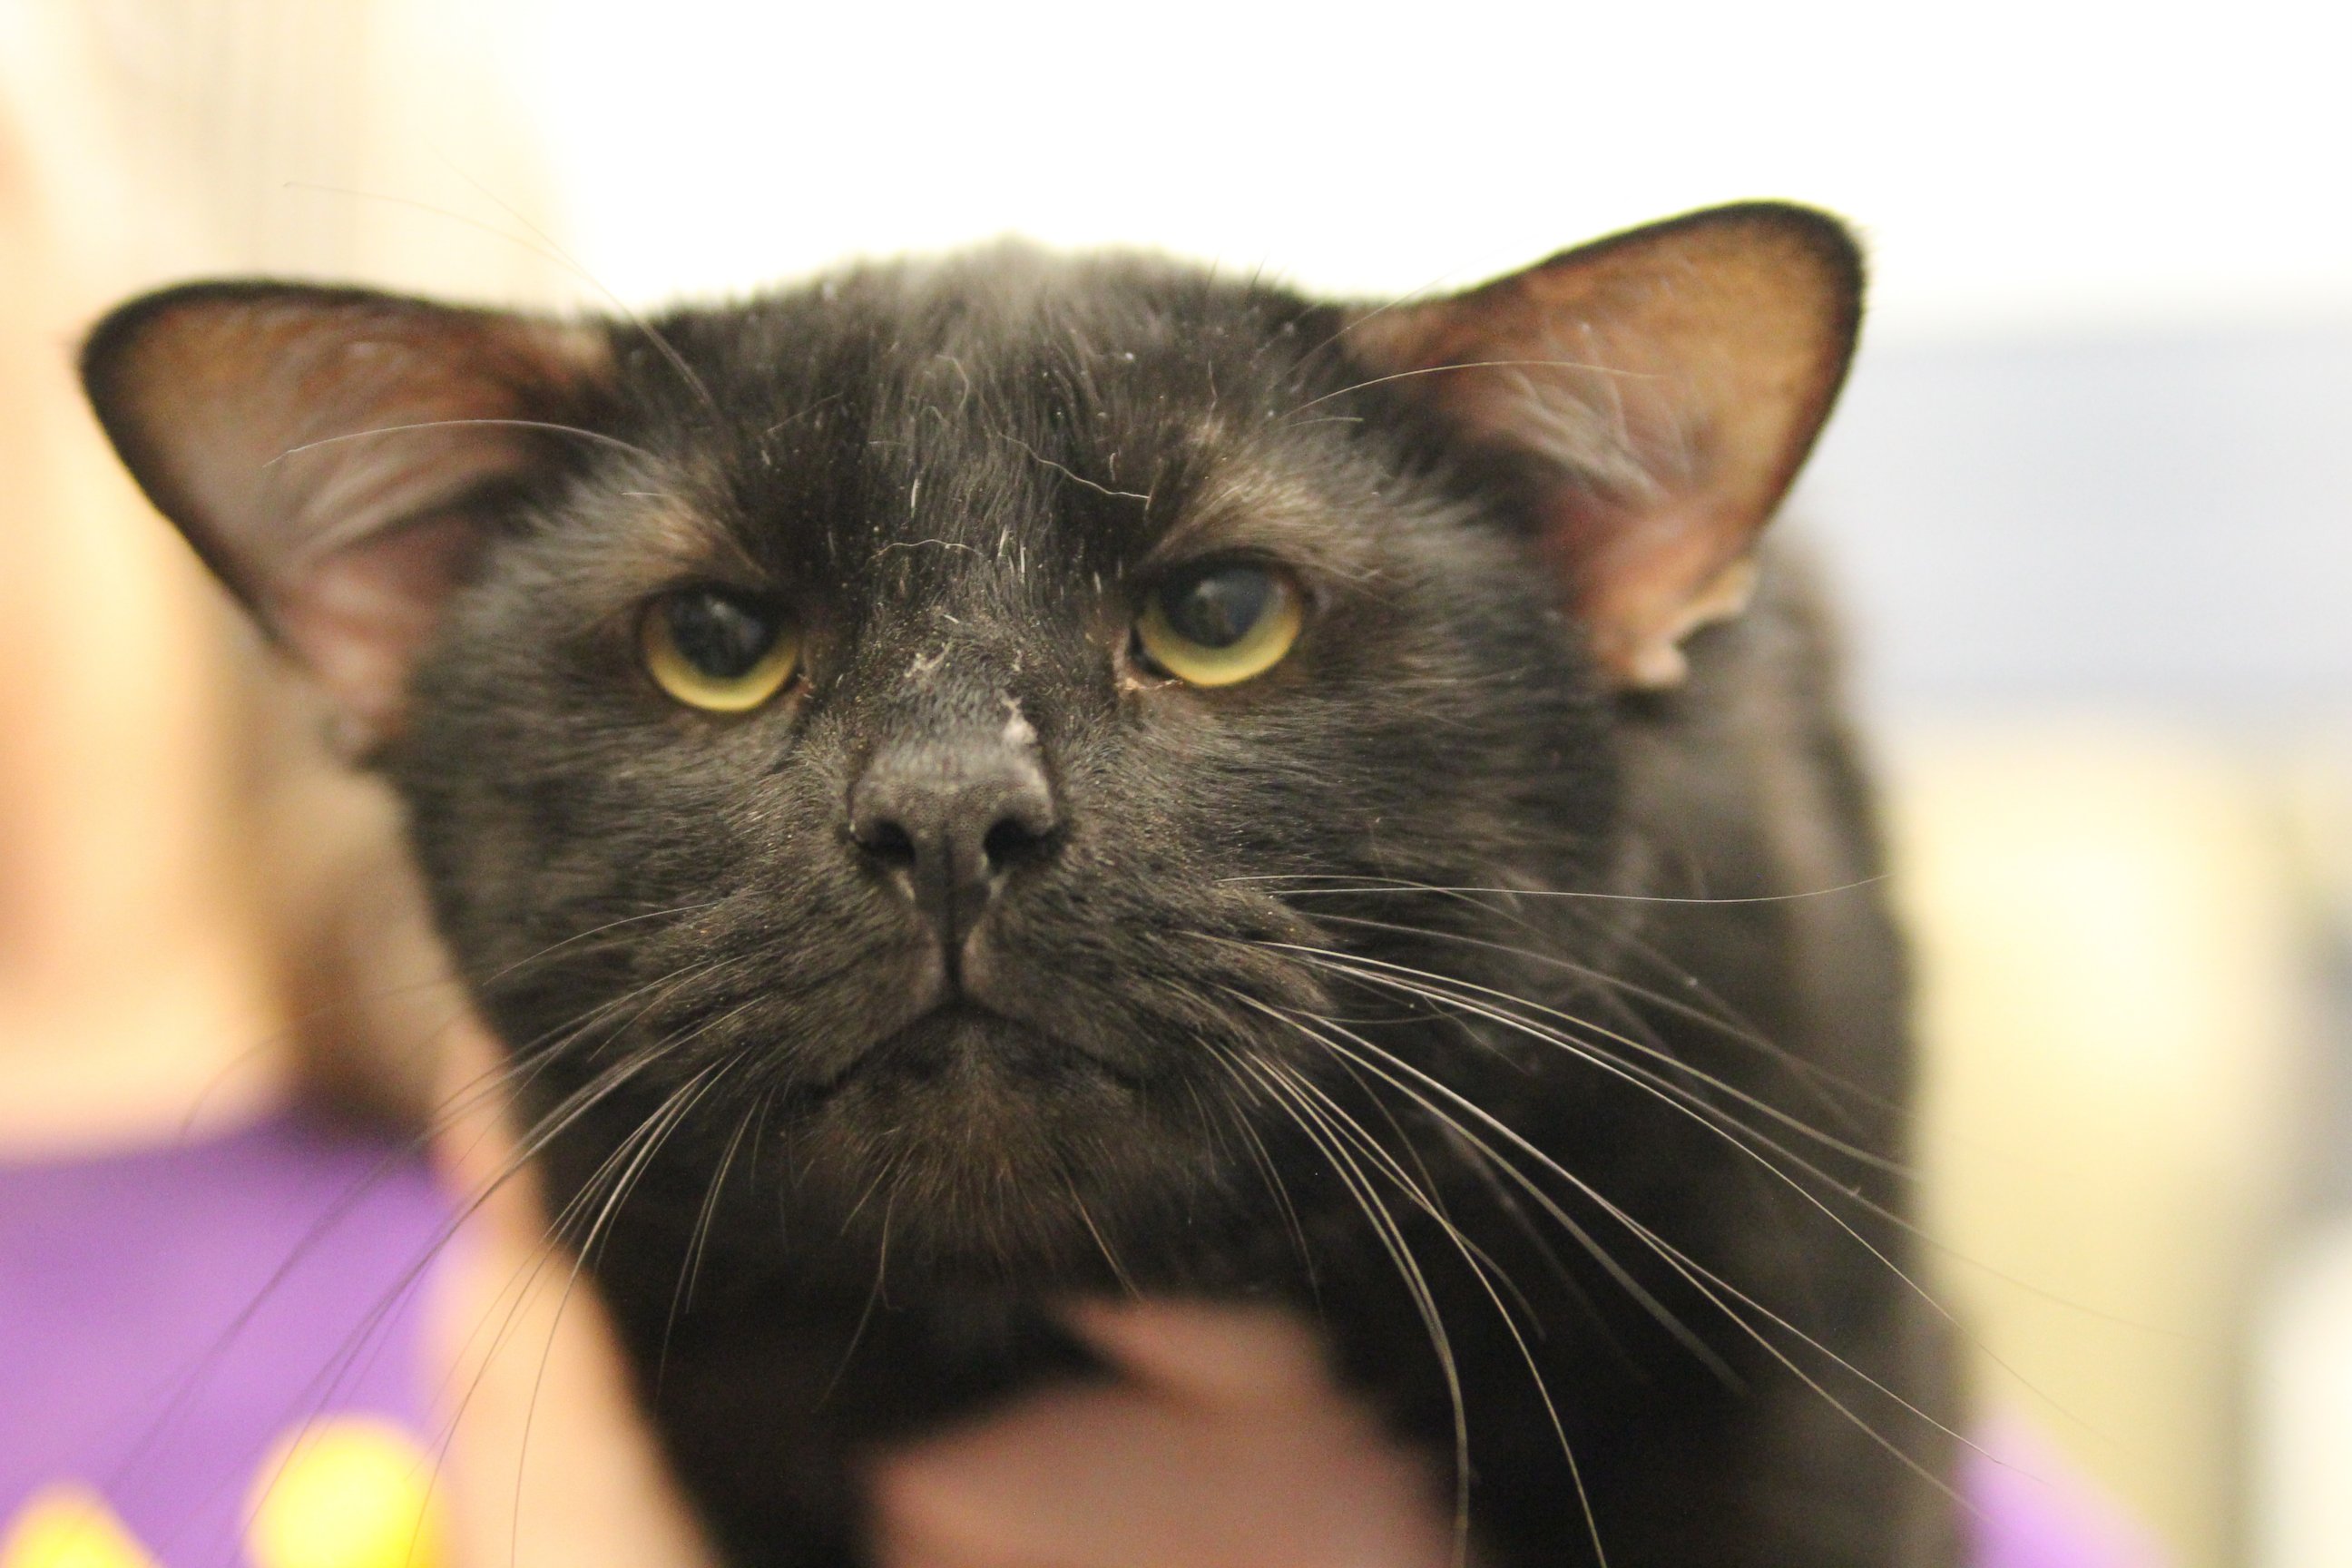 PHOTO: Batman, a unique feline with four ears, was adopted on Aug. 9, 2016, according to the Western Pennsylvania Humane Society in Pittsburgh, Pennsylvania.